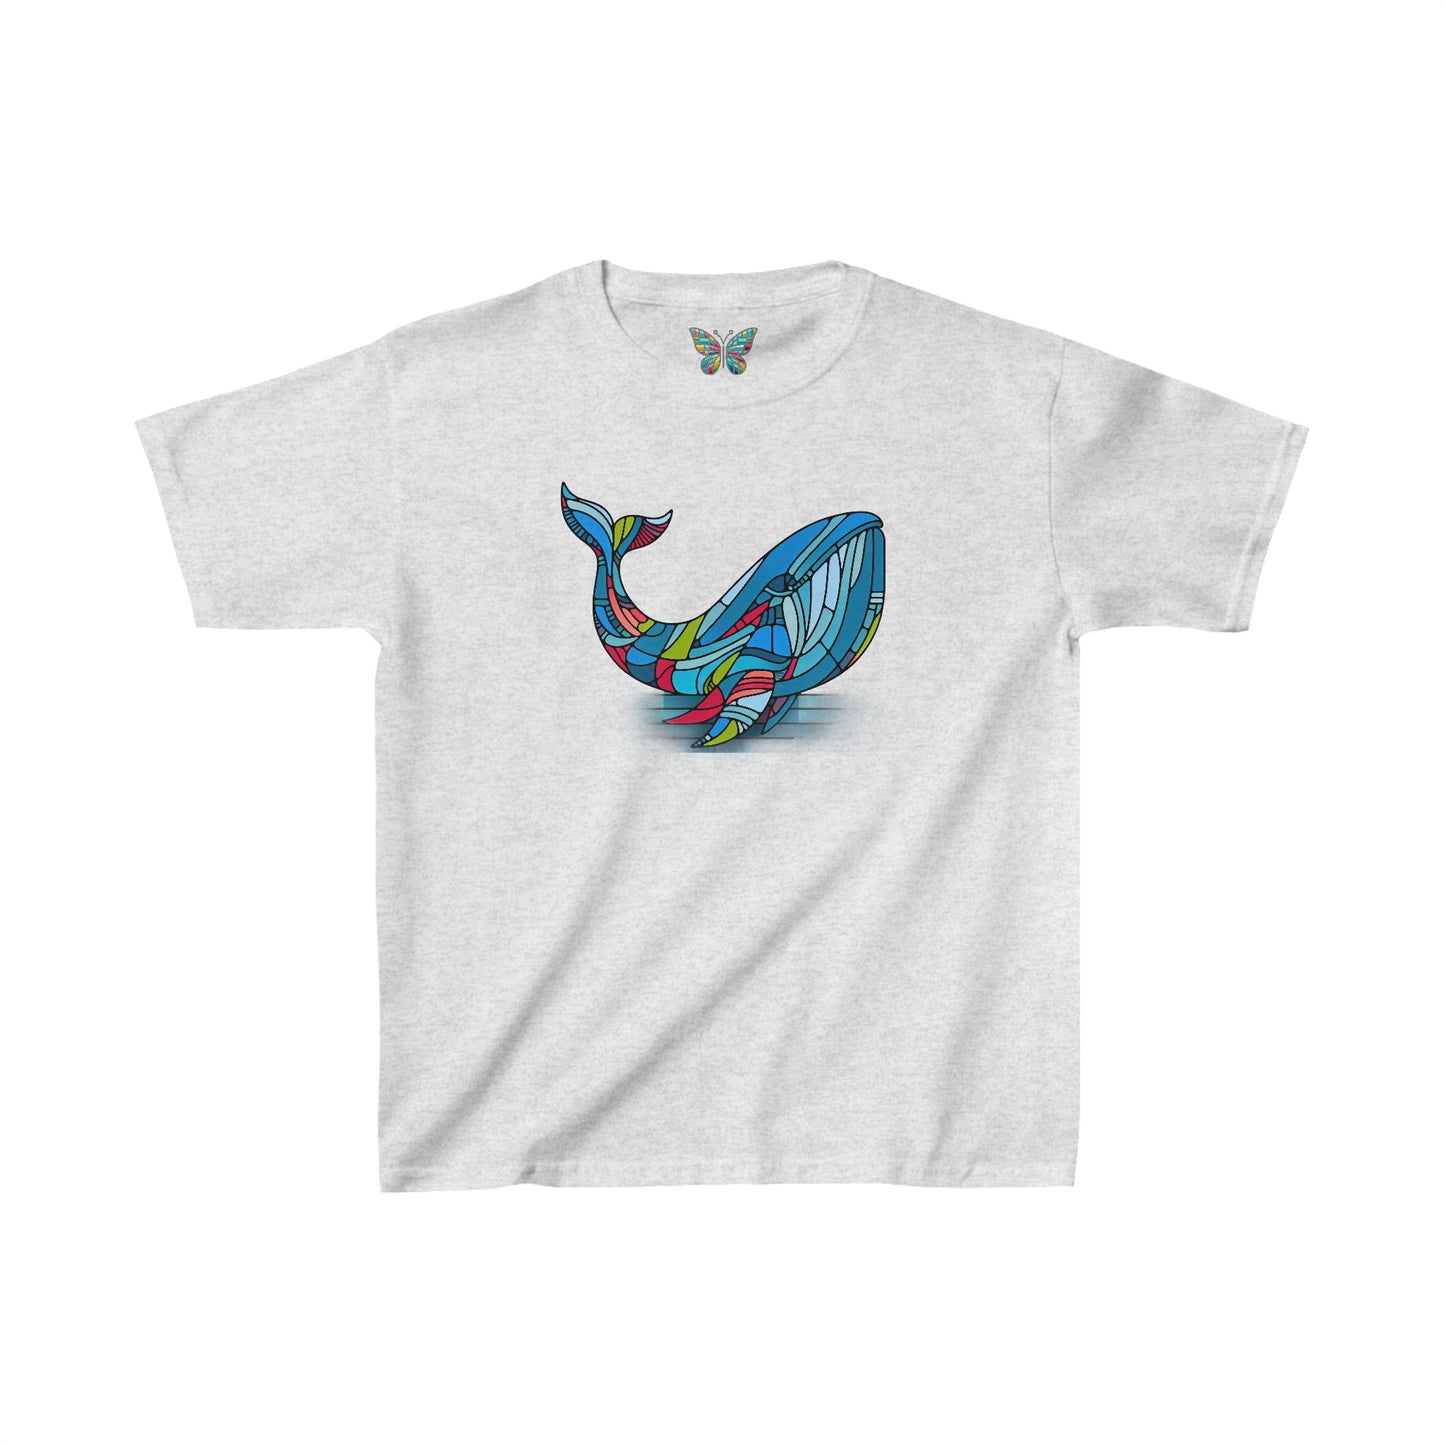 Blue Whale Plenjoyance - Youth - Snazzle Tee